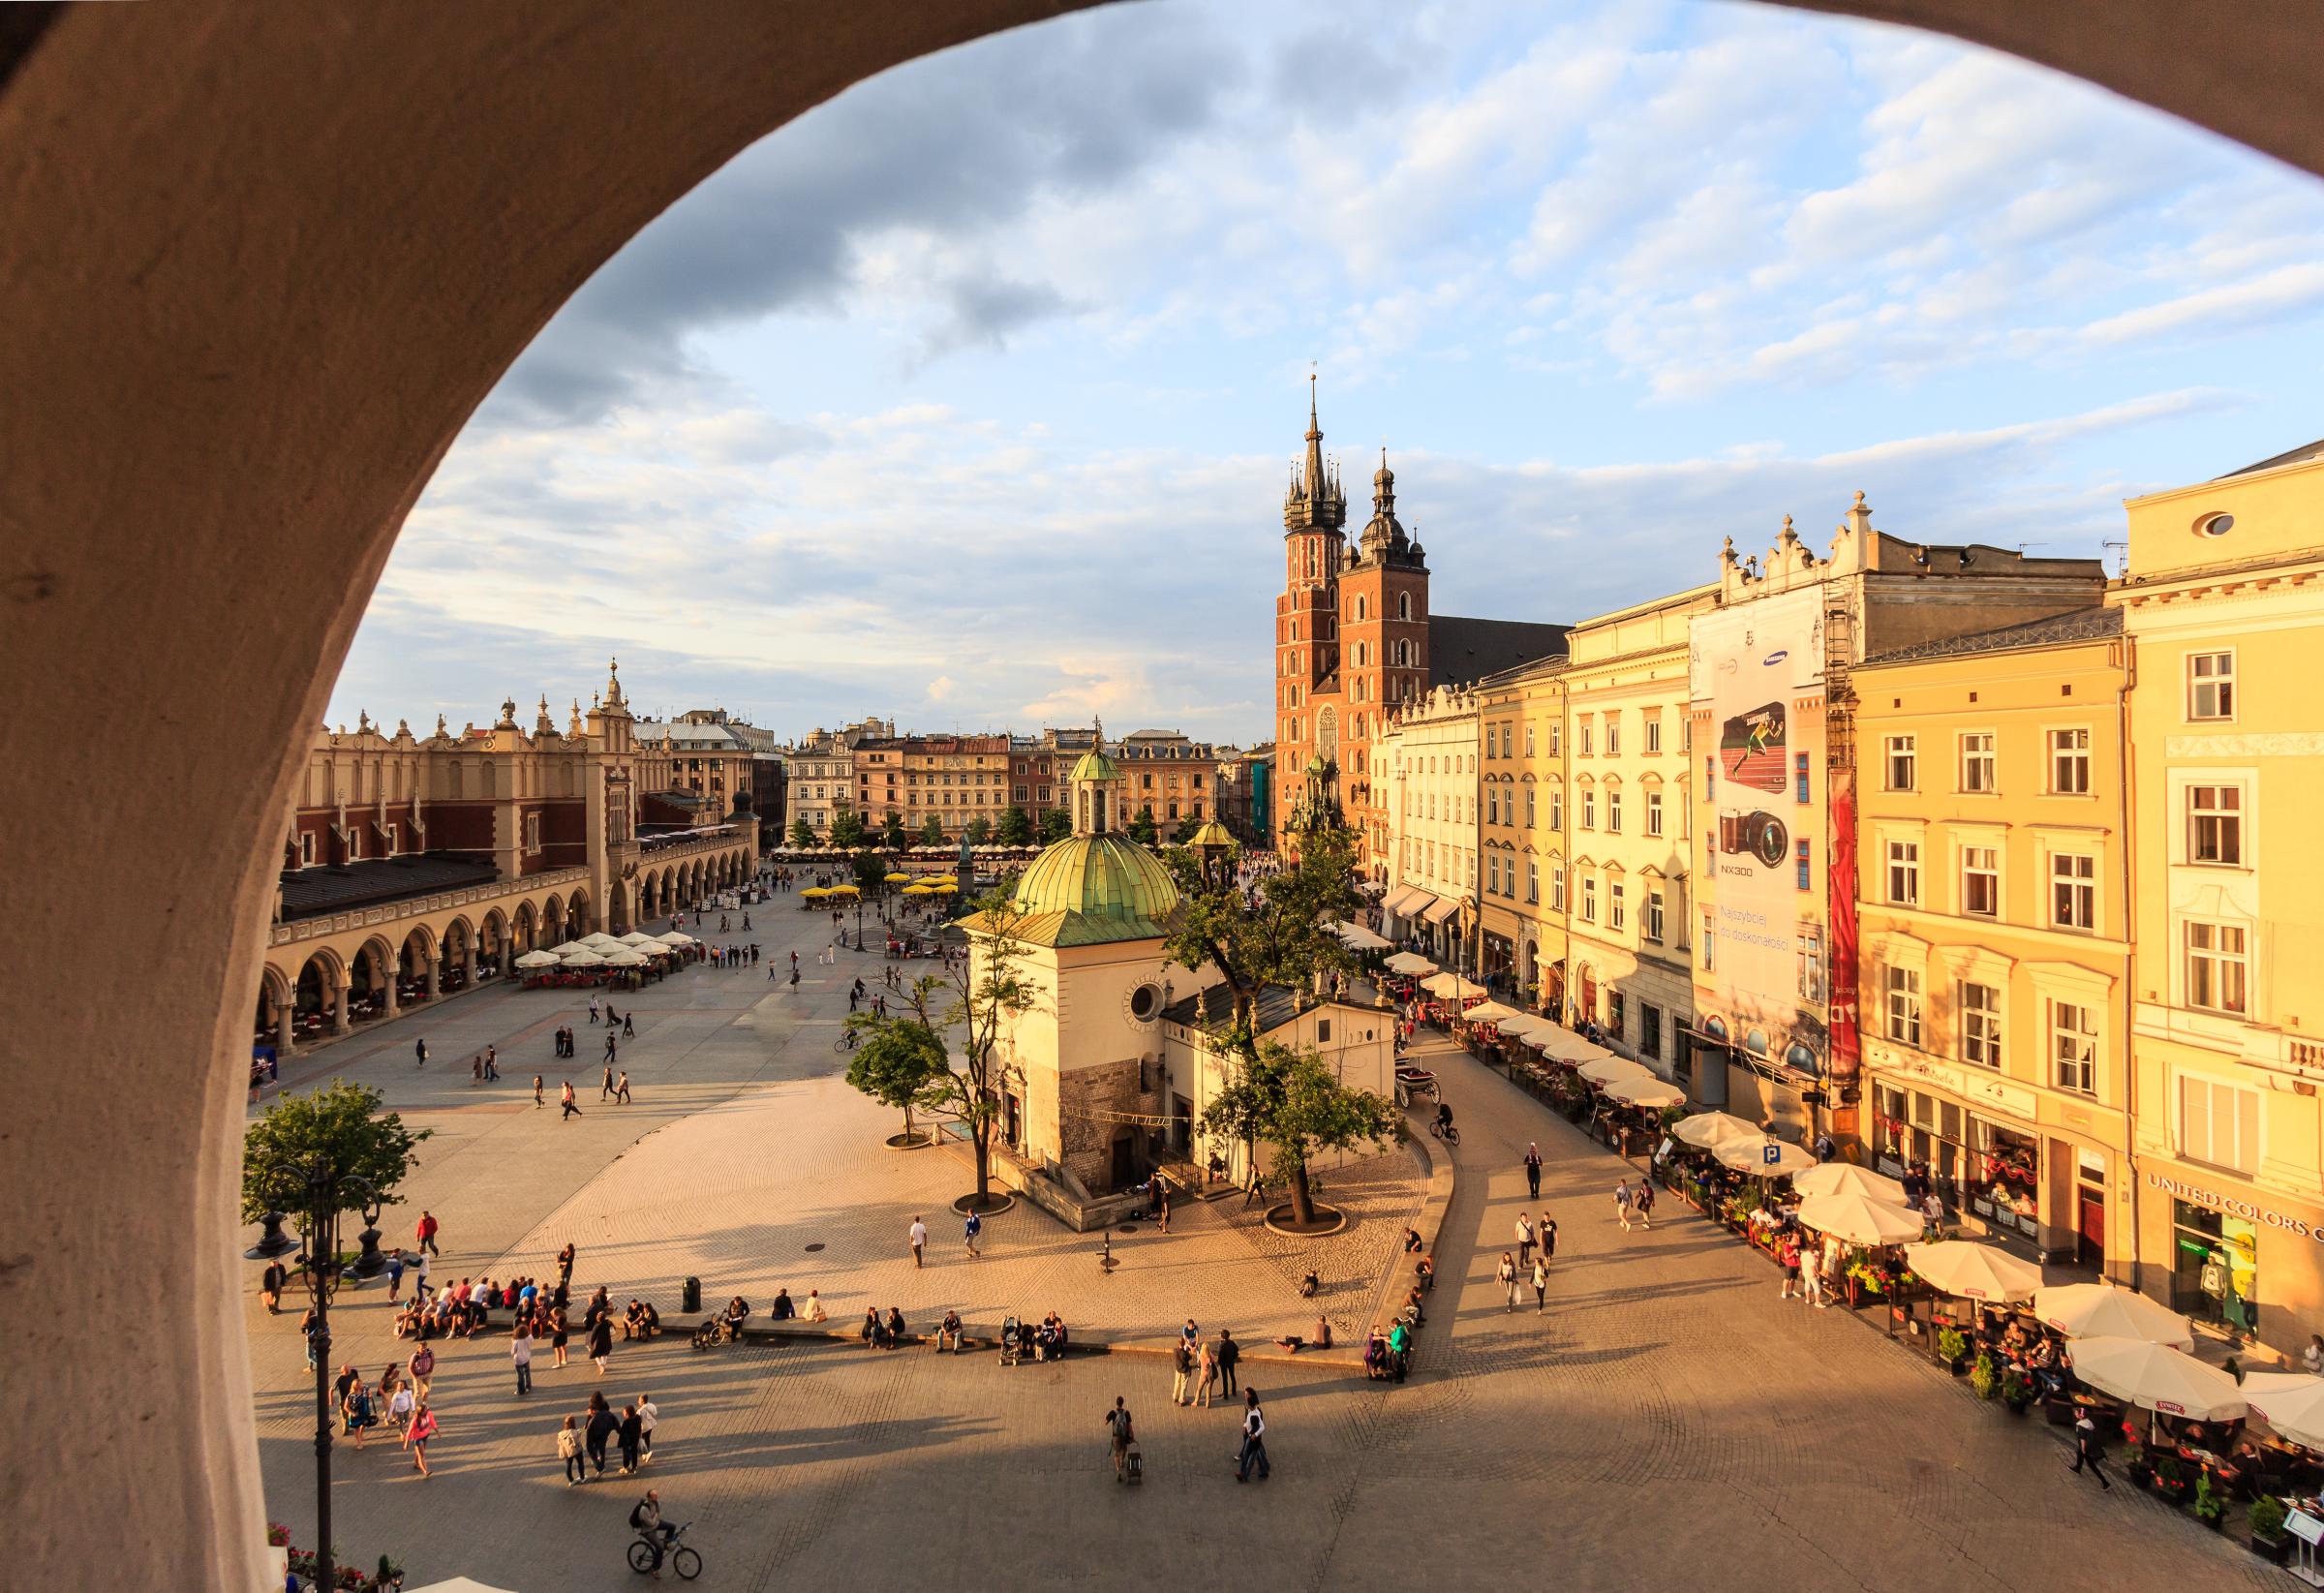 Krakow, main square with St. Mary's basilica